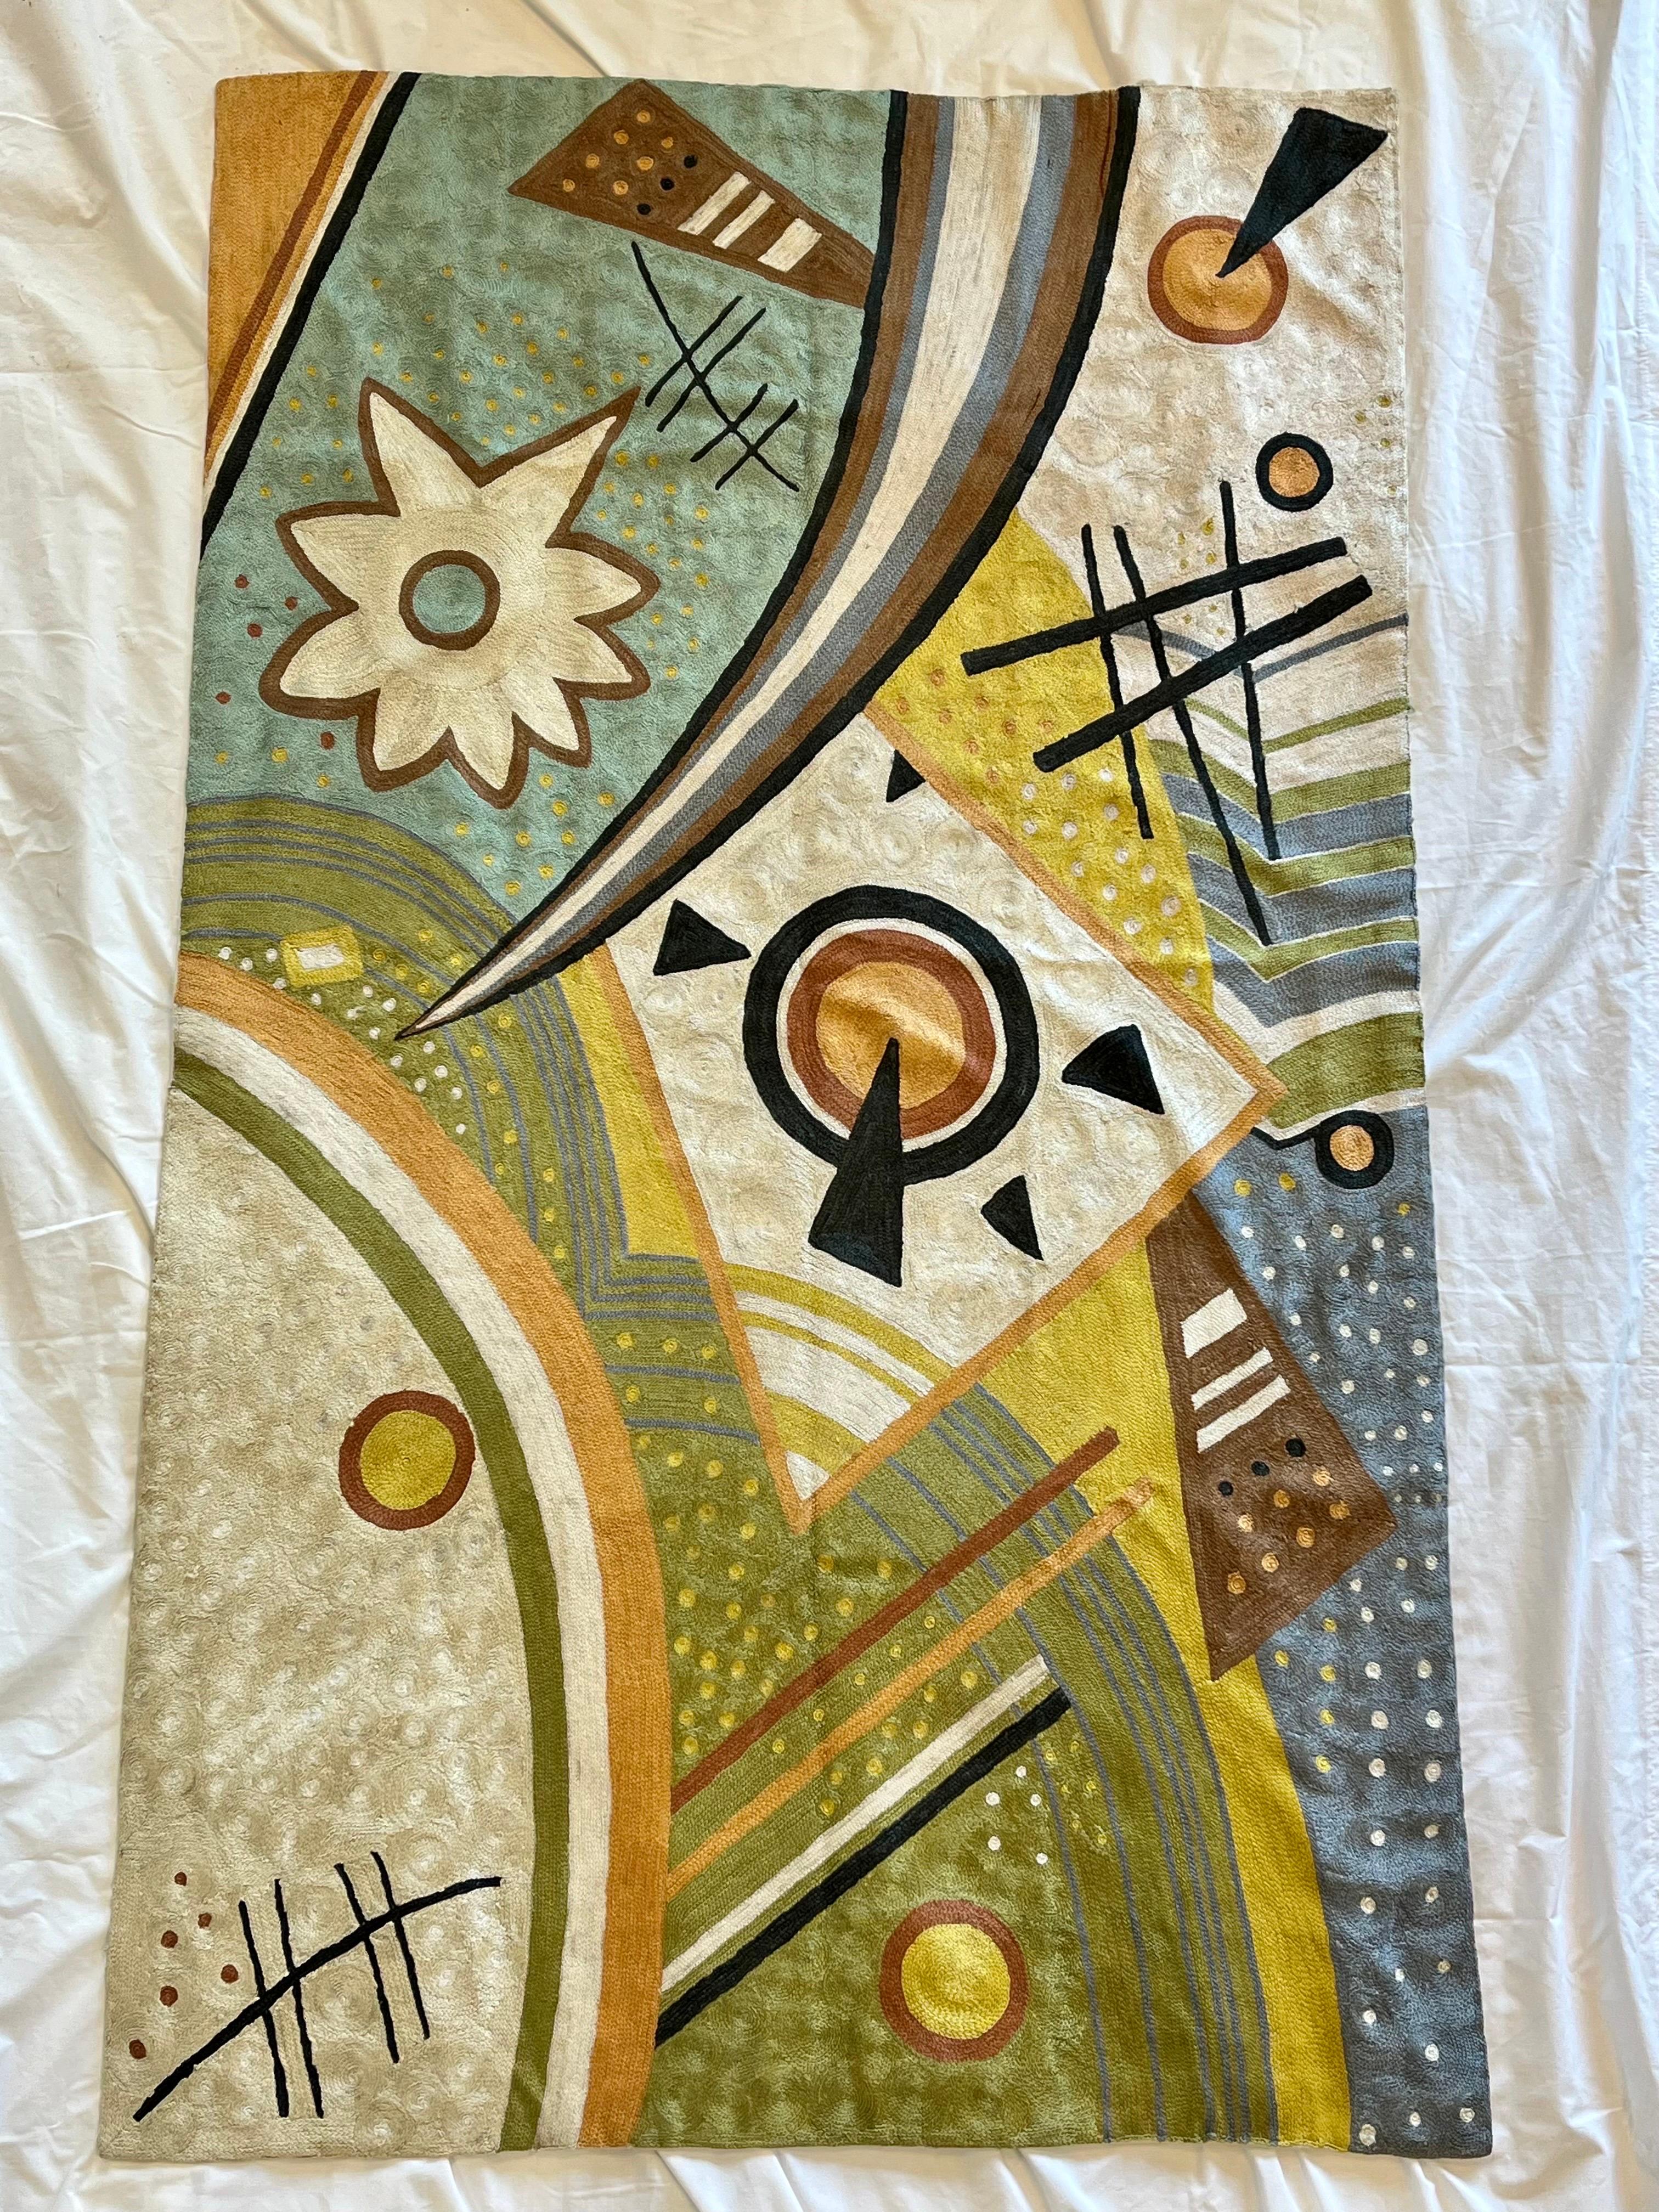 A gorgeous rendition and interpretation of the work of early 20th century Russian avant garde artist Wassily Kandinsky. This contemporary abstract tapestry weaving is hand embroidered using a chain stitch needlepoint method. The design is clearly